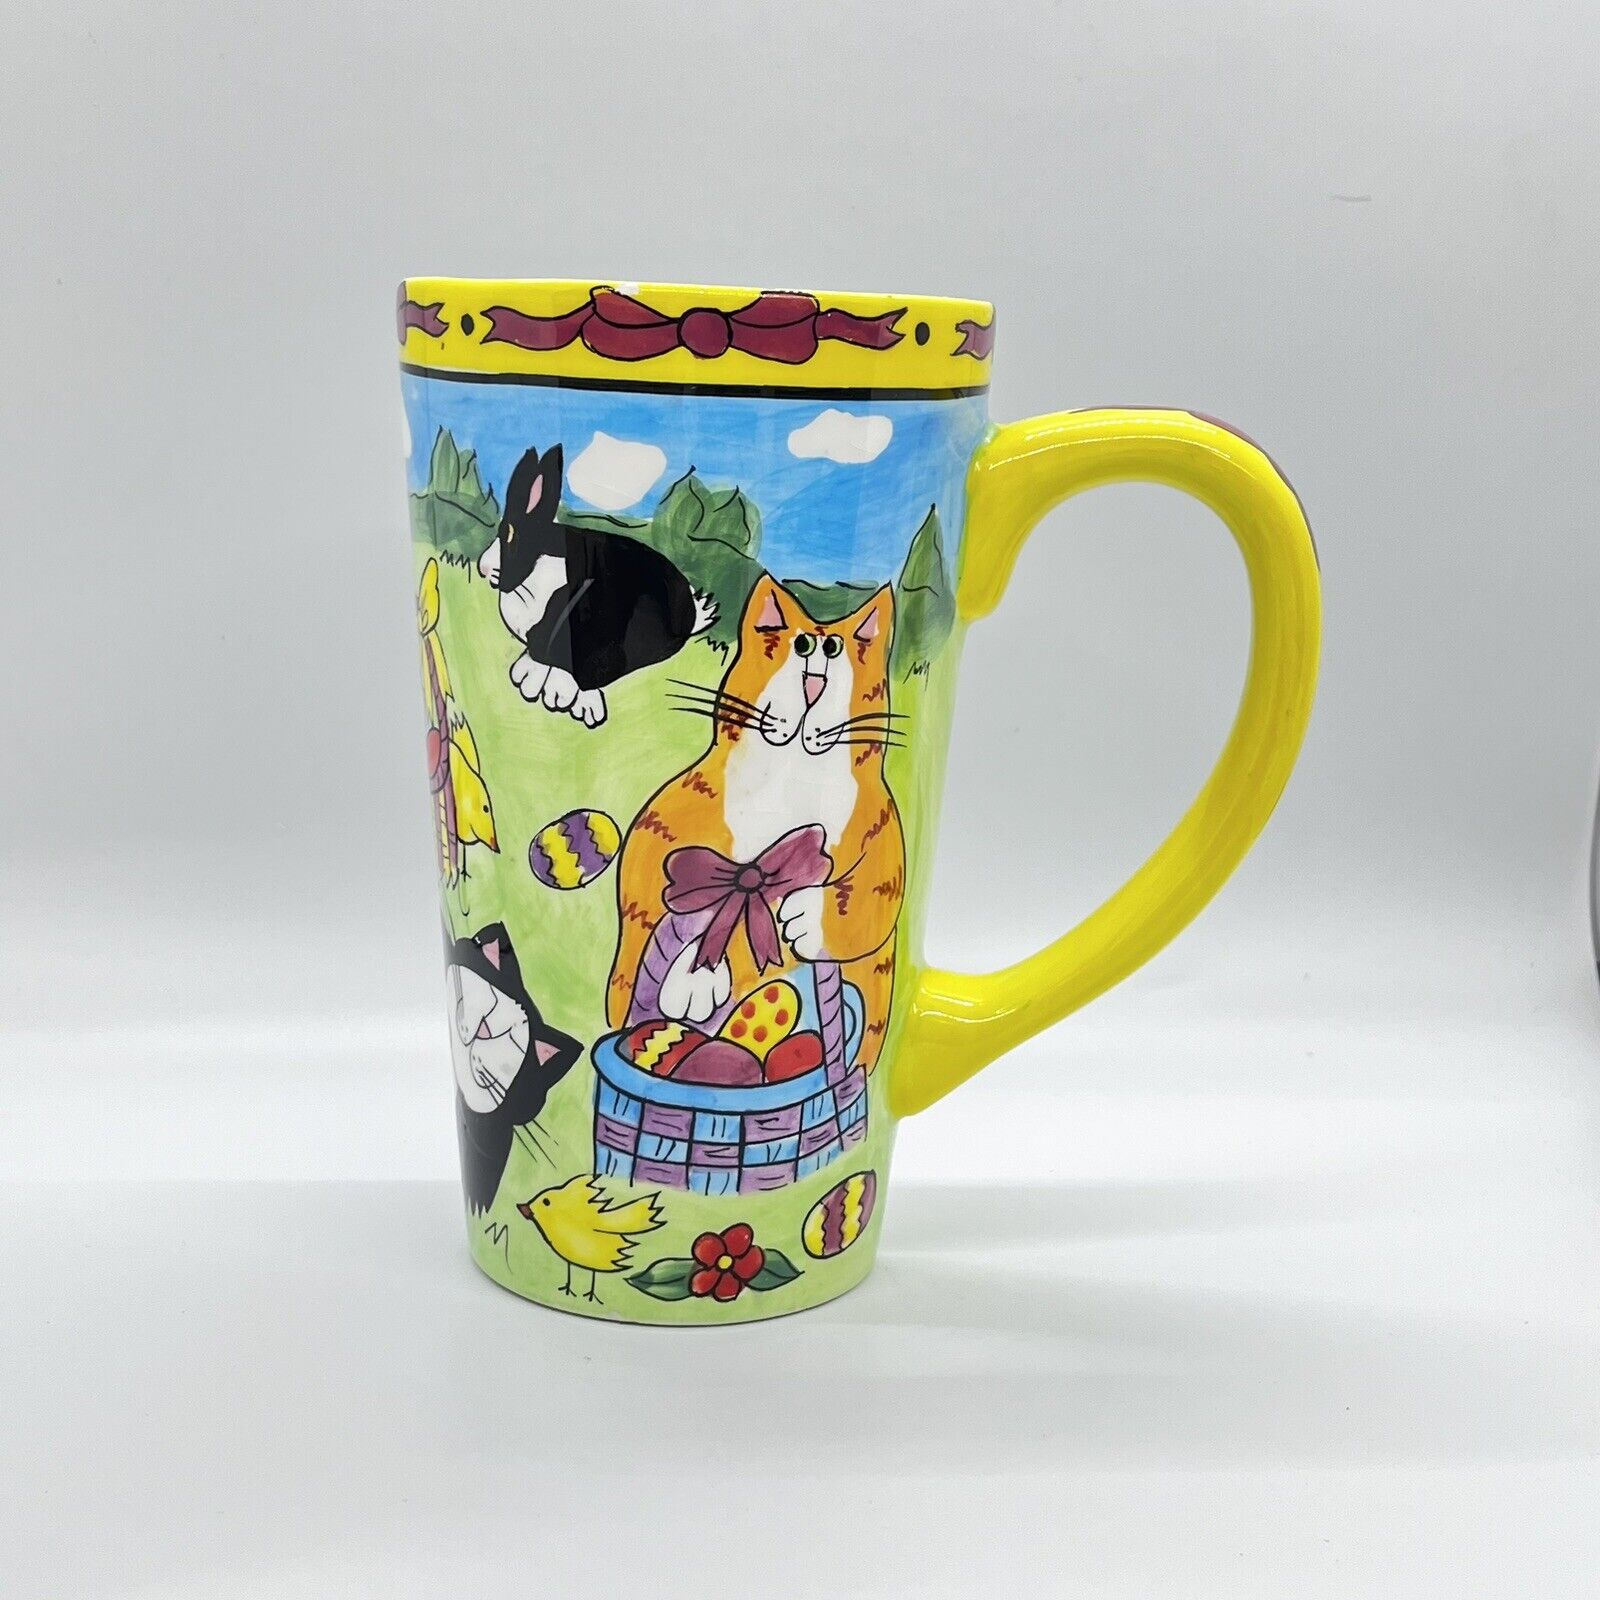 CATZILLA 2001 Tall Ceramic Mug by Candace Reiter Easter Eggs Cats Bunny READ